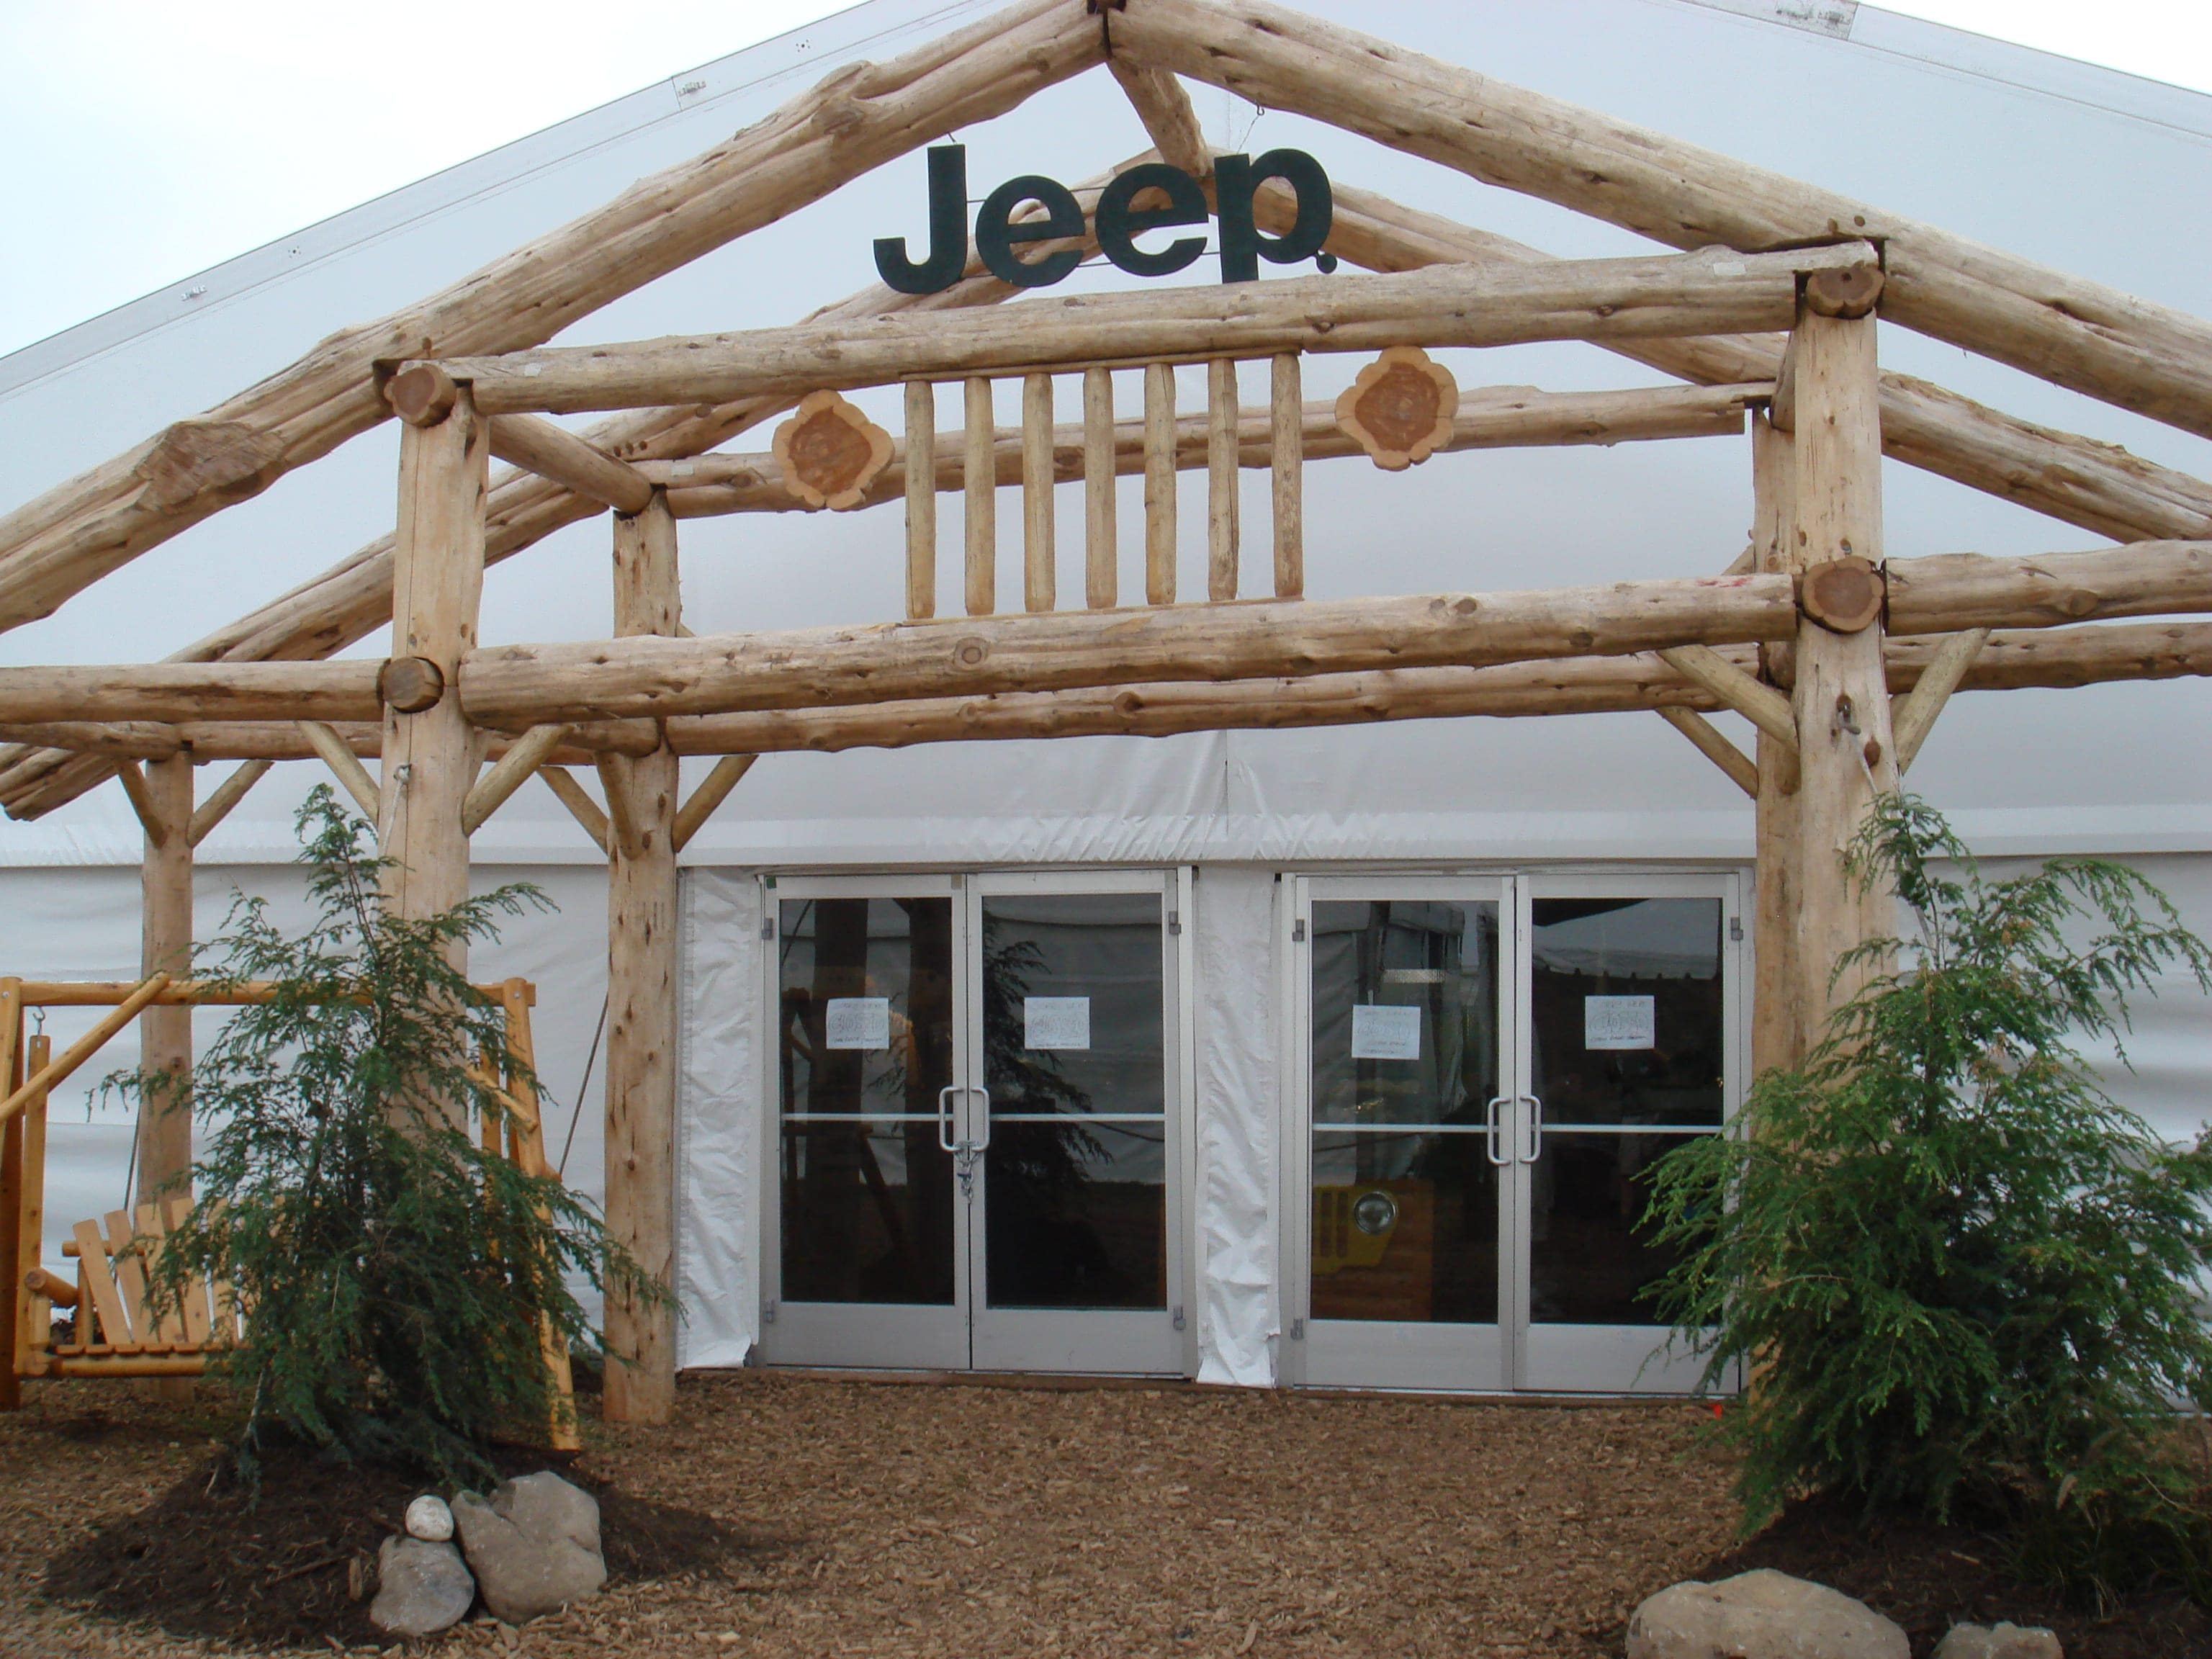 Entrance to a 20000 squar foot clearspan tent for the Jeep division of Chrysler - American Pavilion